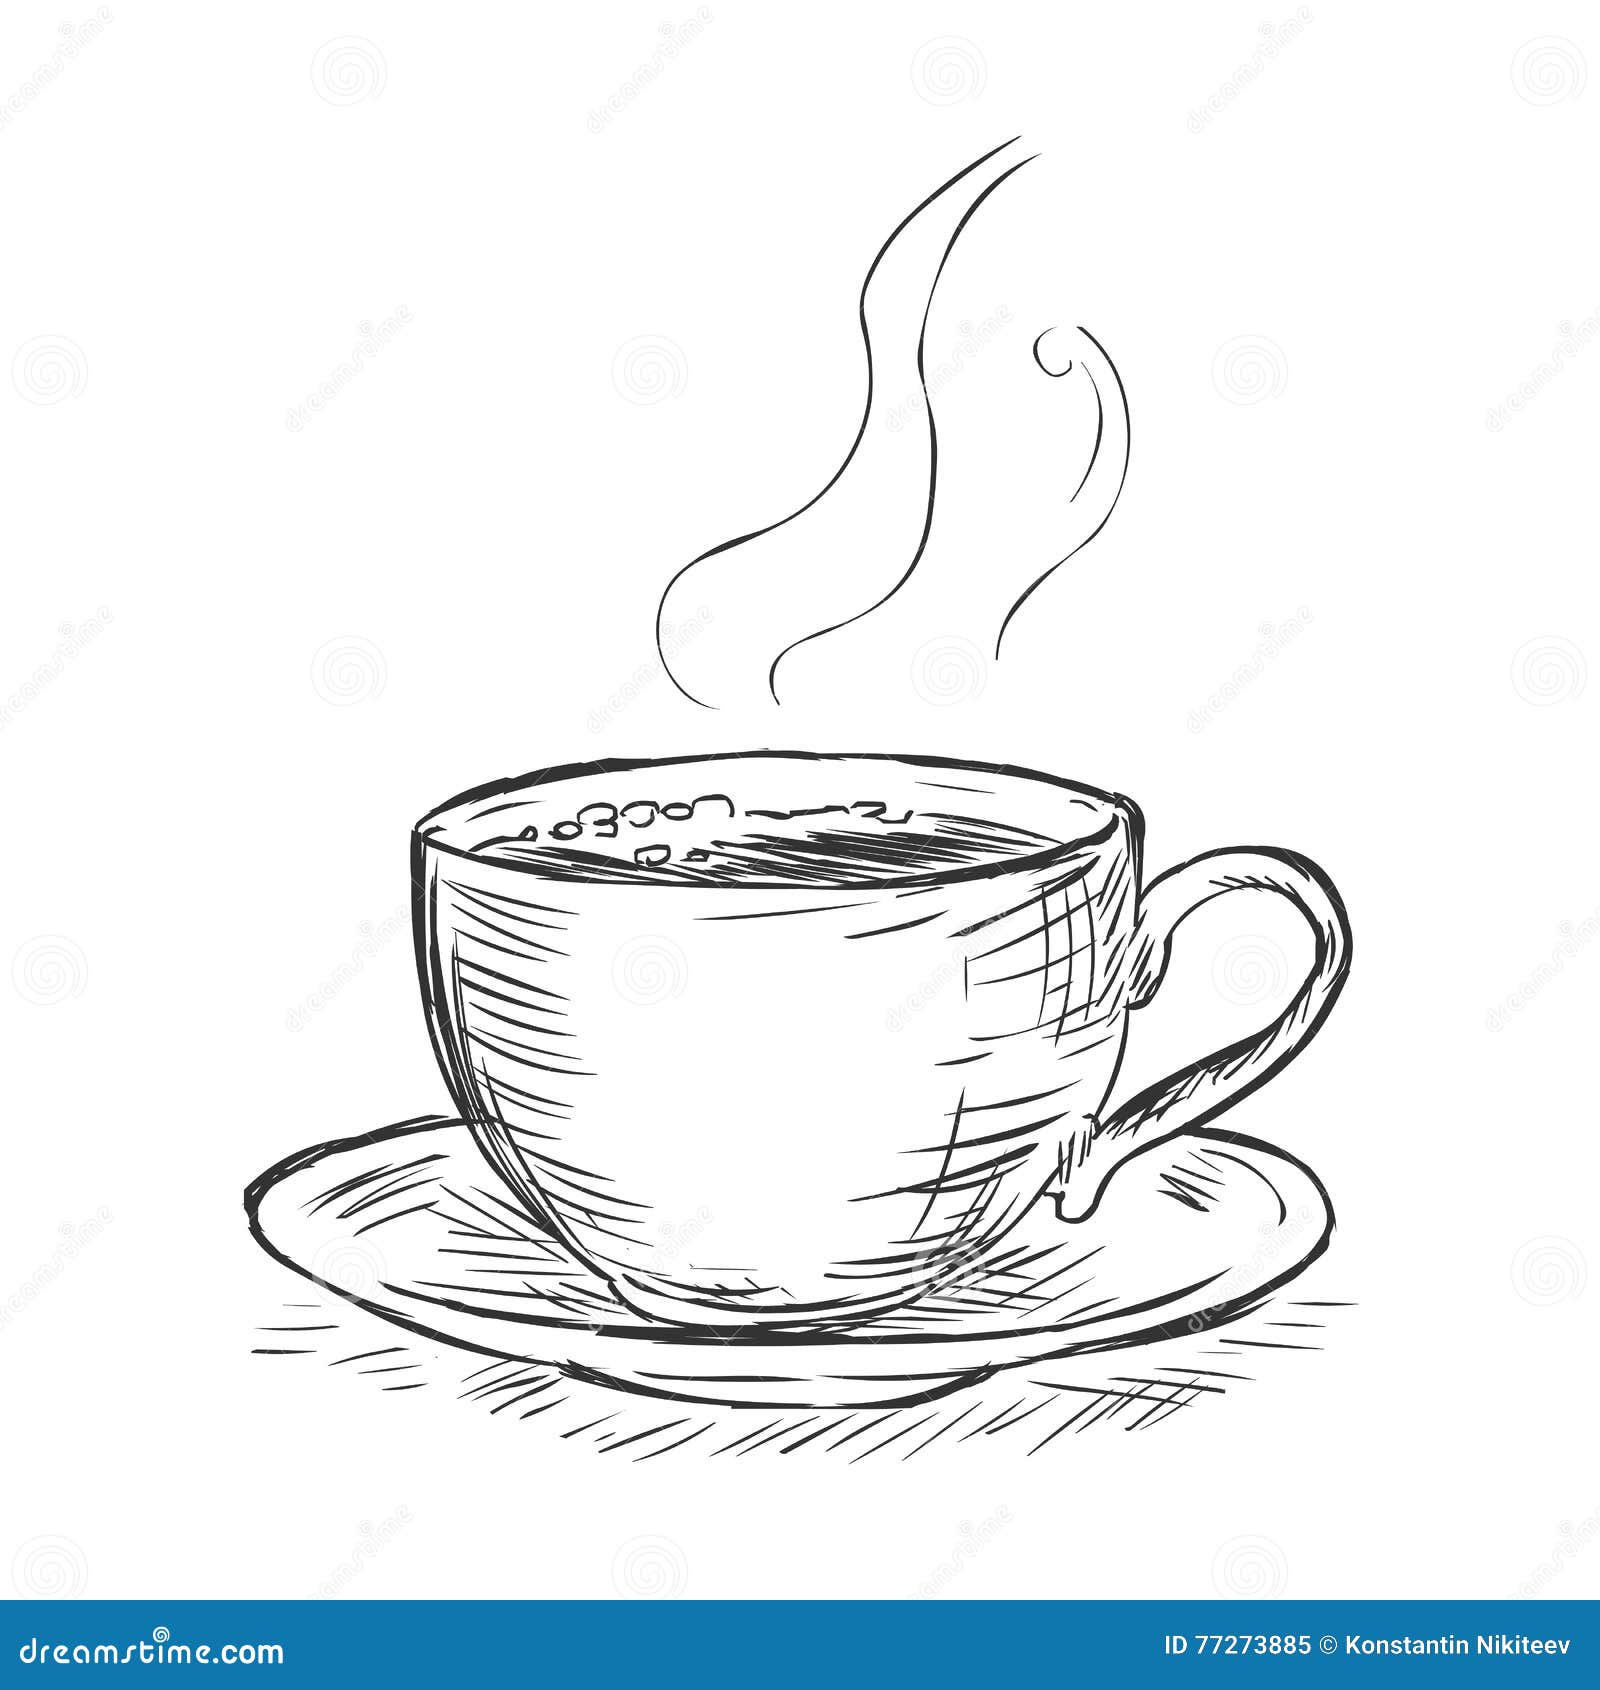 Our Coffee - Sketch Transparent PNG - 3317x3846 - Free Download on NicePNG